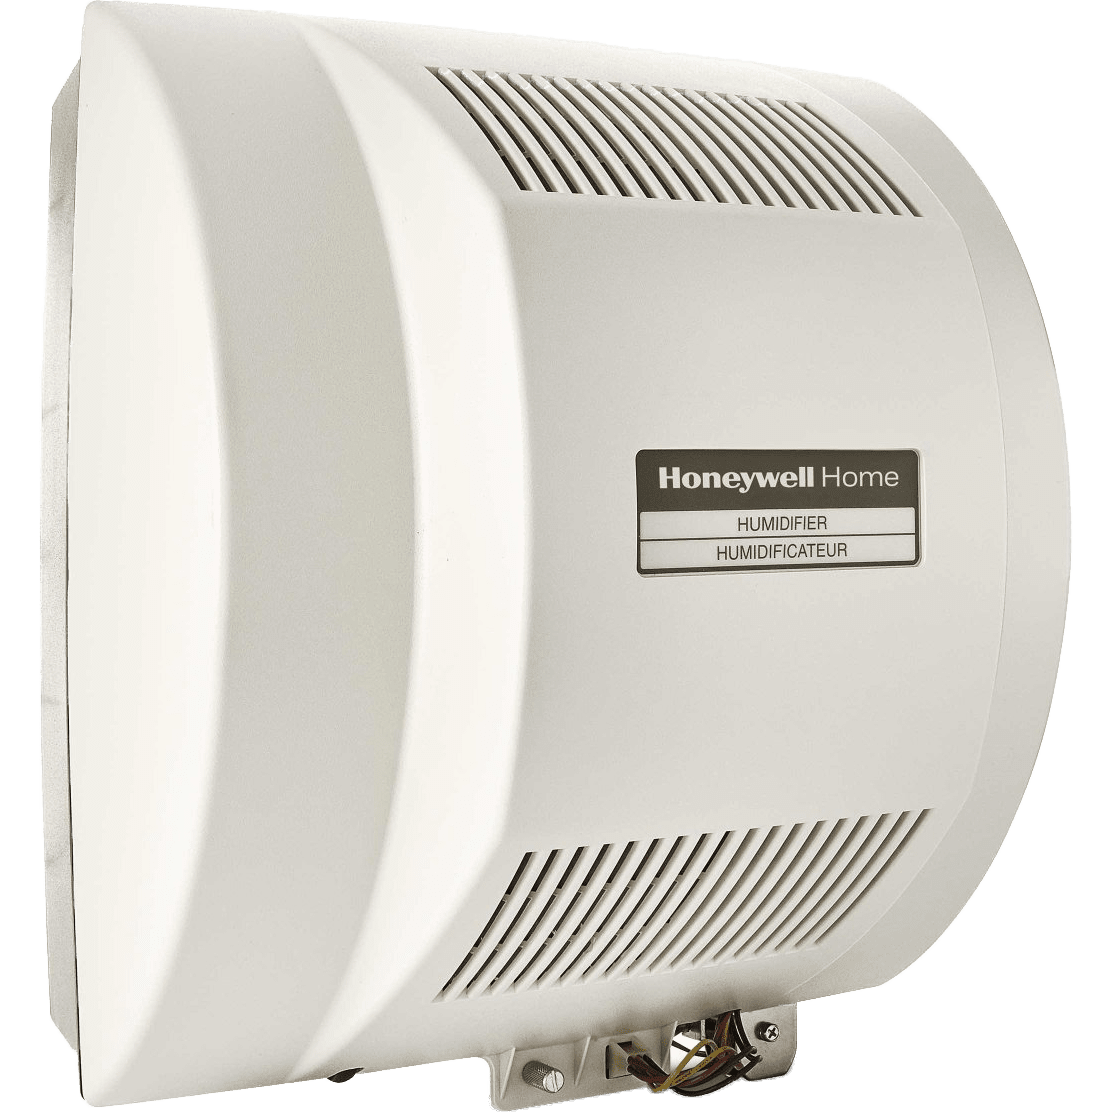 https://s3-assets.sylvane.com/media/images/products/honeywell-he360-whole-house-flow-through-humidifier-angle-2.png